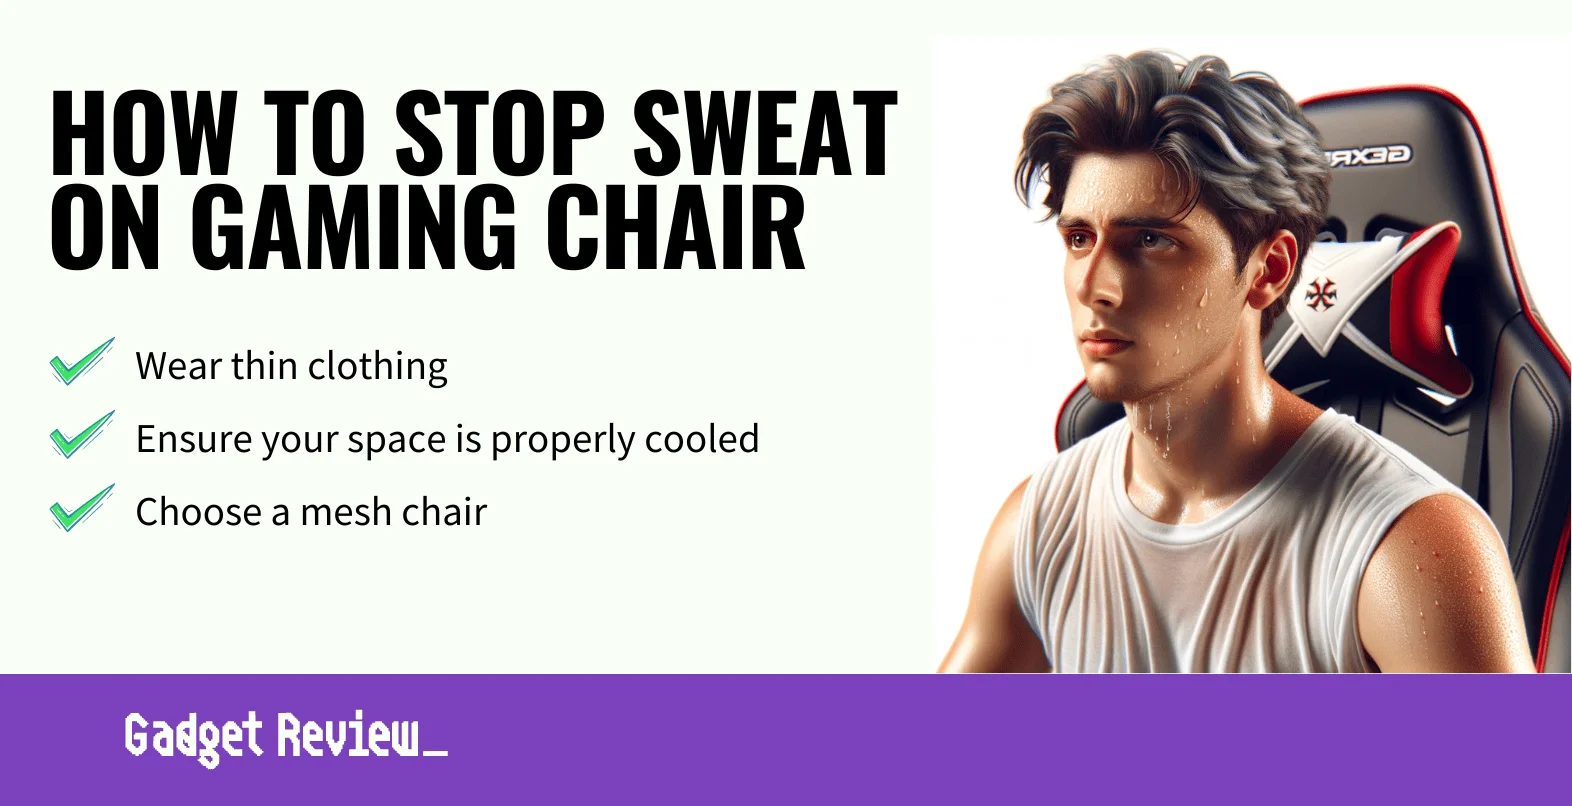 How to Stop Sweat on Gaming Chair